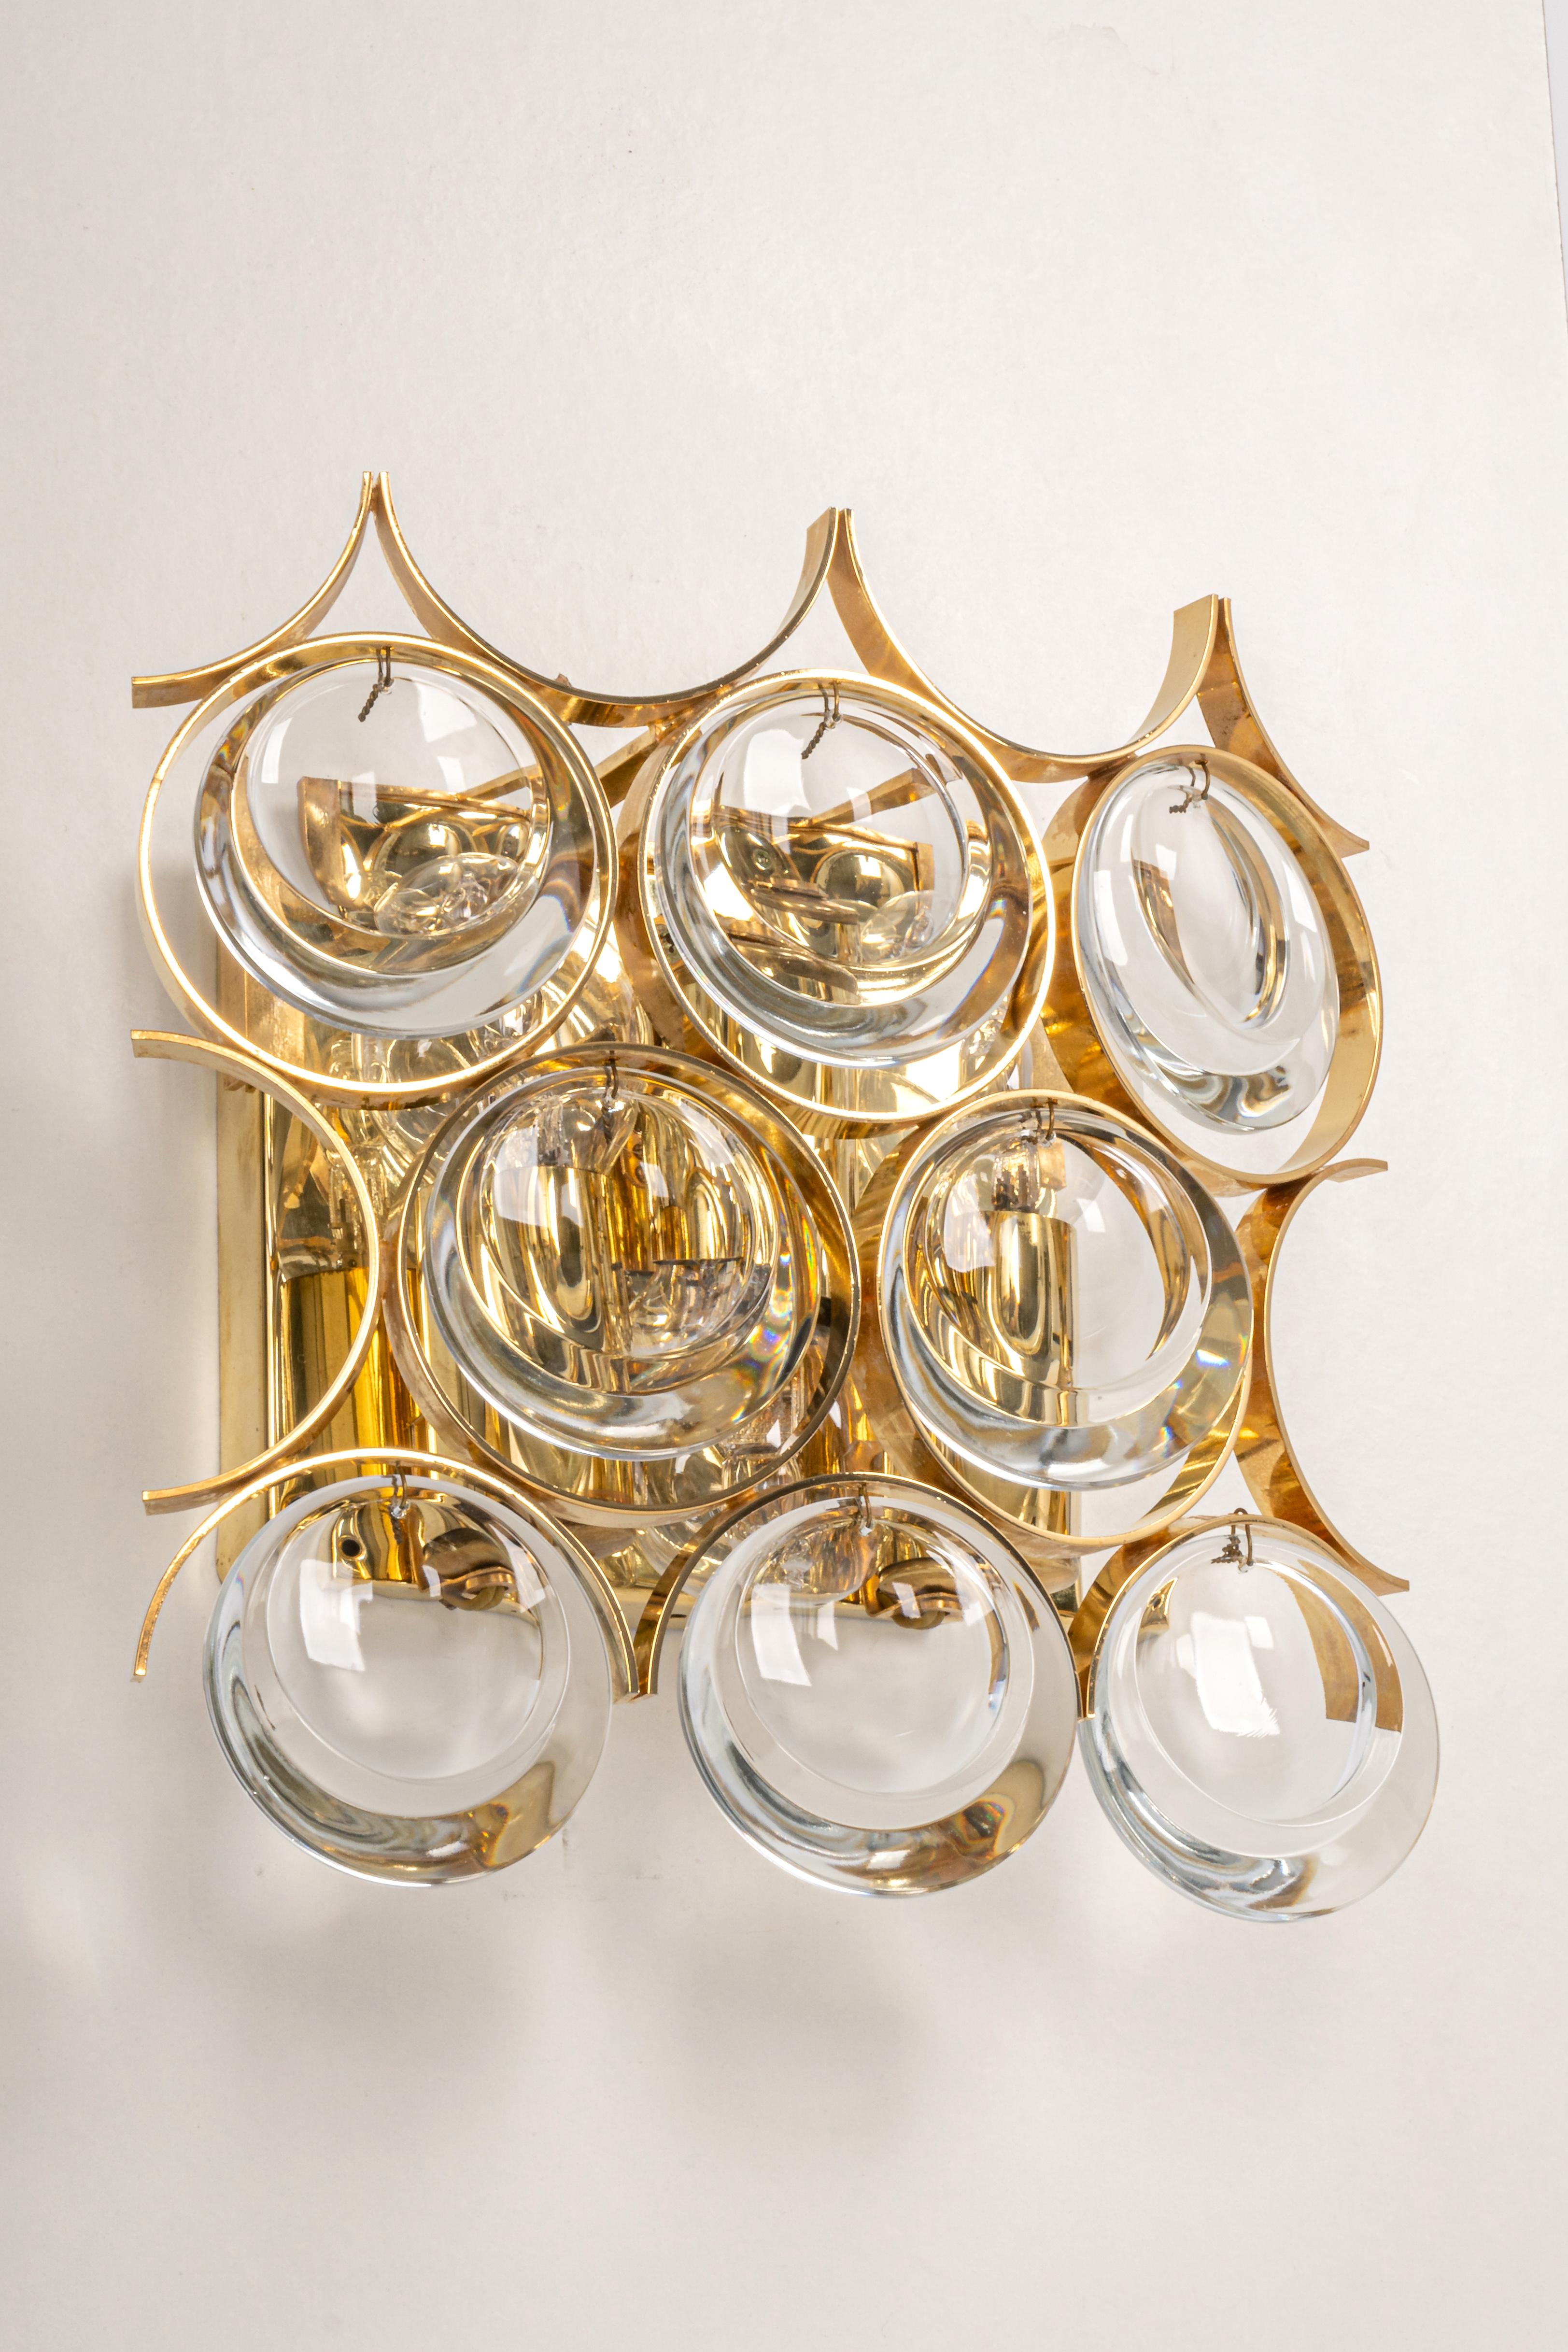 1 of 3 Pairs of Crystal Wall Lights, Sciolari Design, Palwa, Germany, 1960s For Sale 4